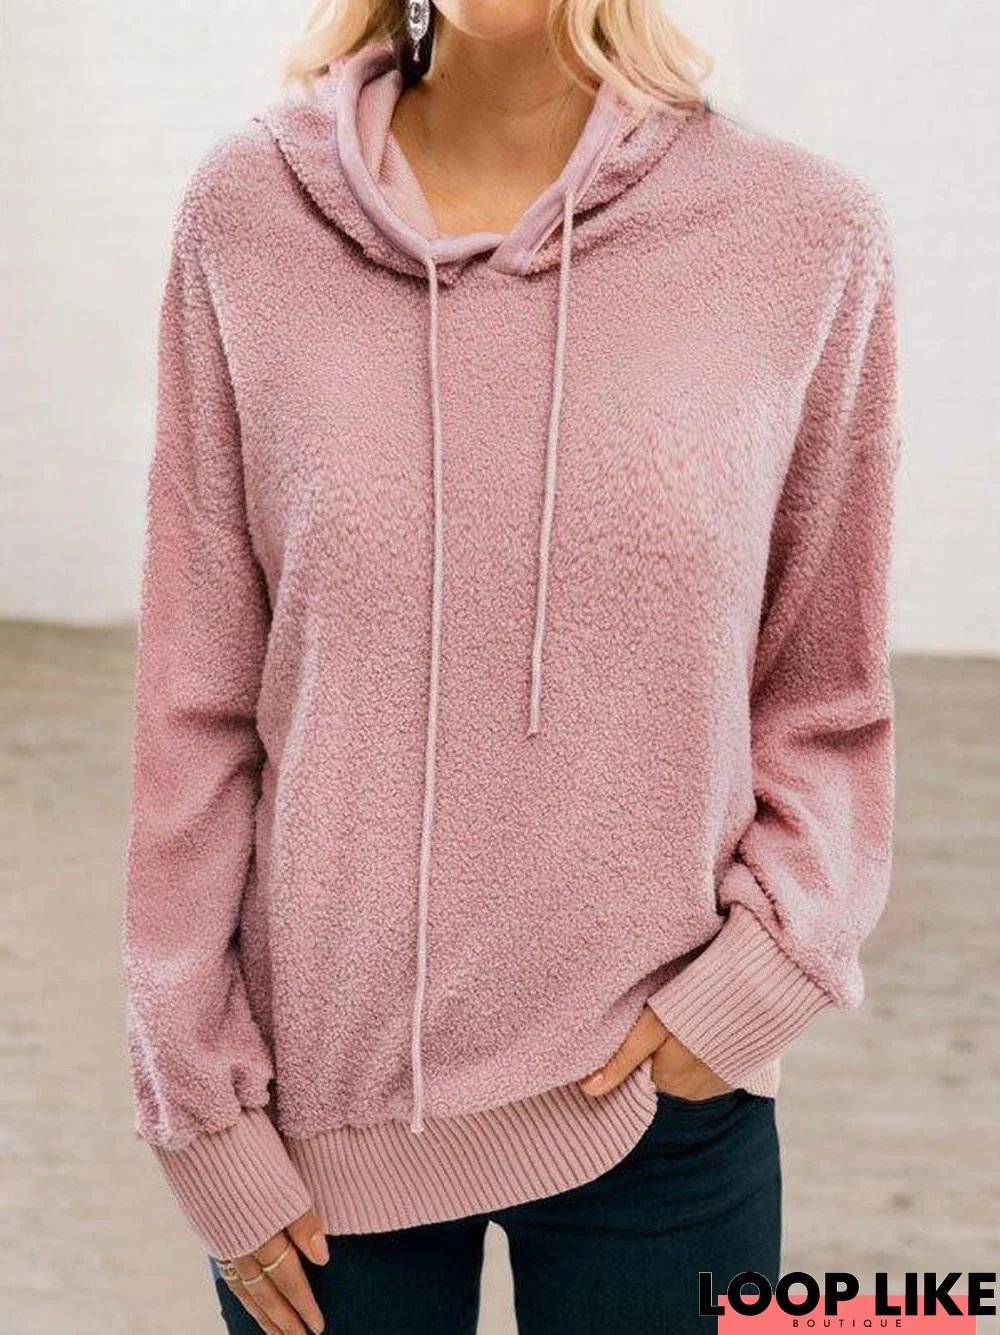 Hoodie Long Sleeve Solid Cotton-Blend Sweater